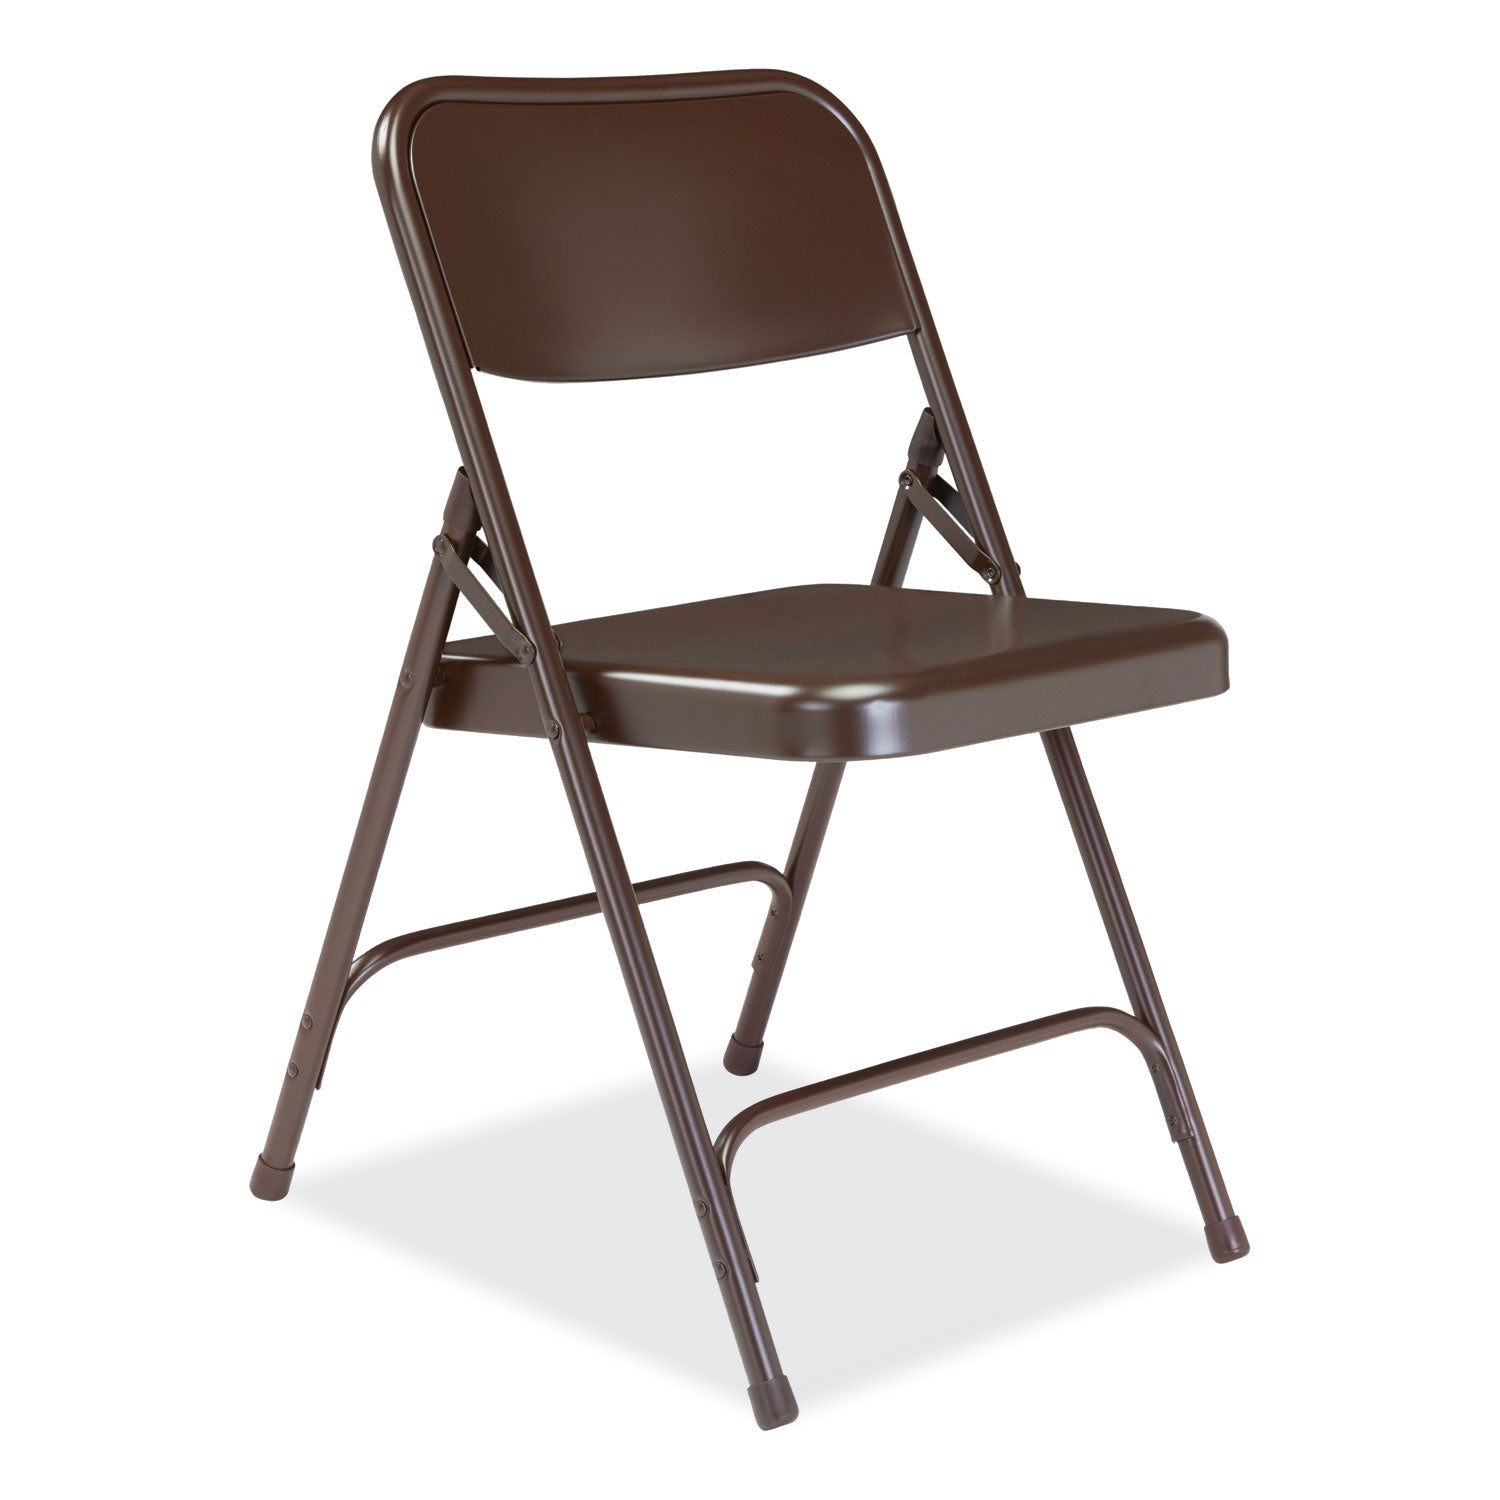 200-series-premium-all-steel-double-hinge-folding-chair-supports-500-lb-1725-seat-ht-brown-4-ct-ships-in-1-3-bus-days_nps203 - 2